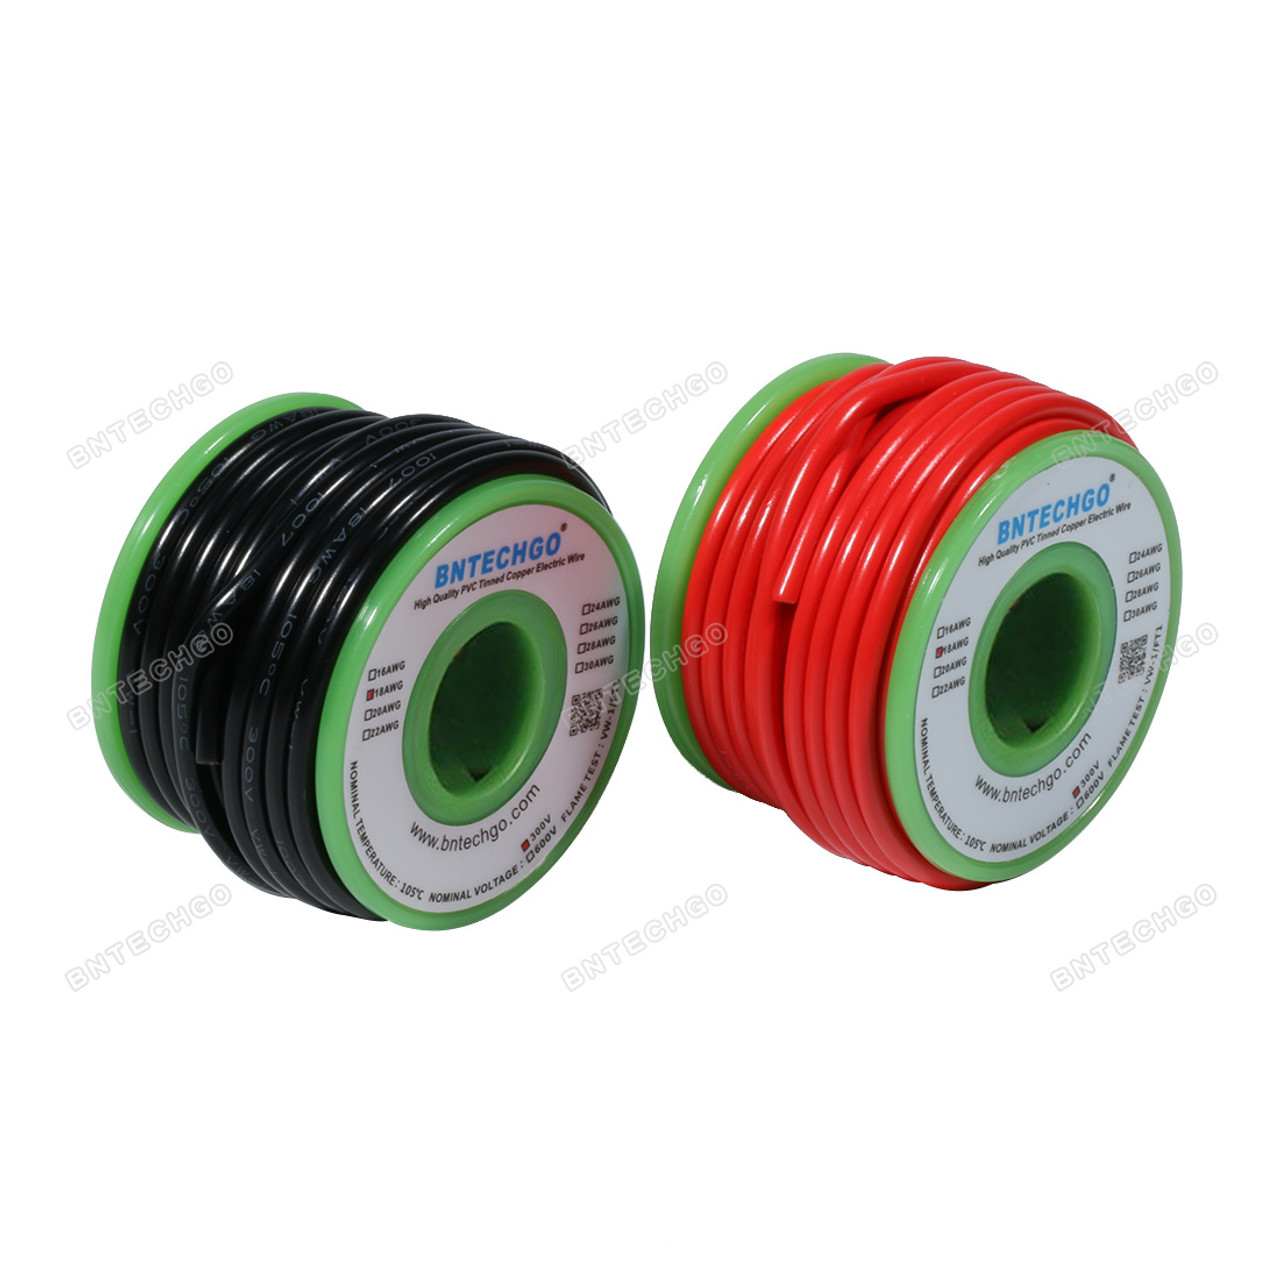 BNTECHGO 18 Gauge PVC 1007 Solid Electric Wire Red and Black Each 20 ft 18  AWG 1007 Hook Up Tinned Copper Wire